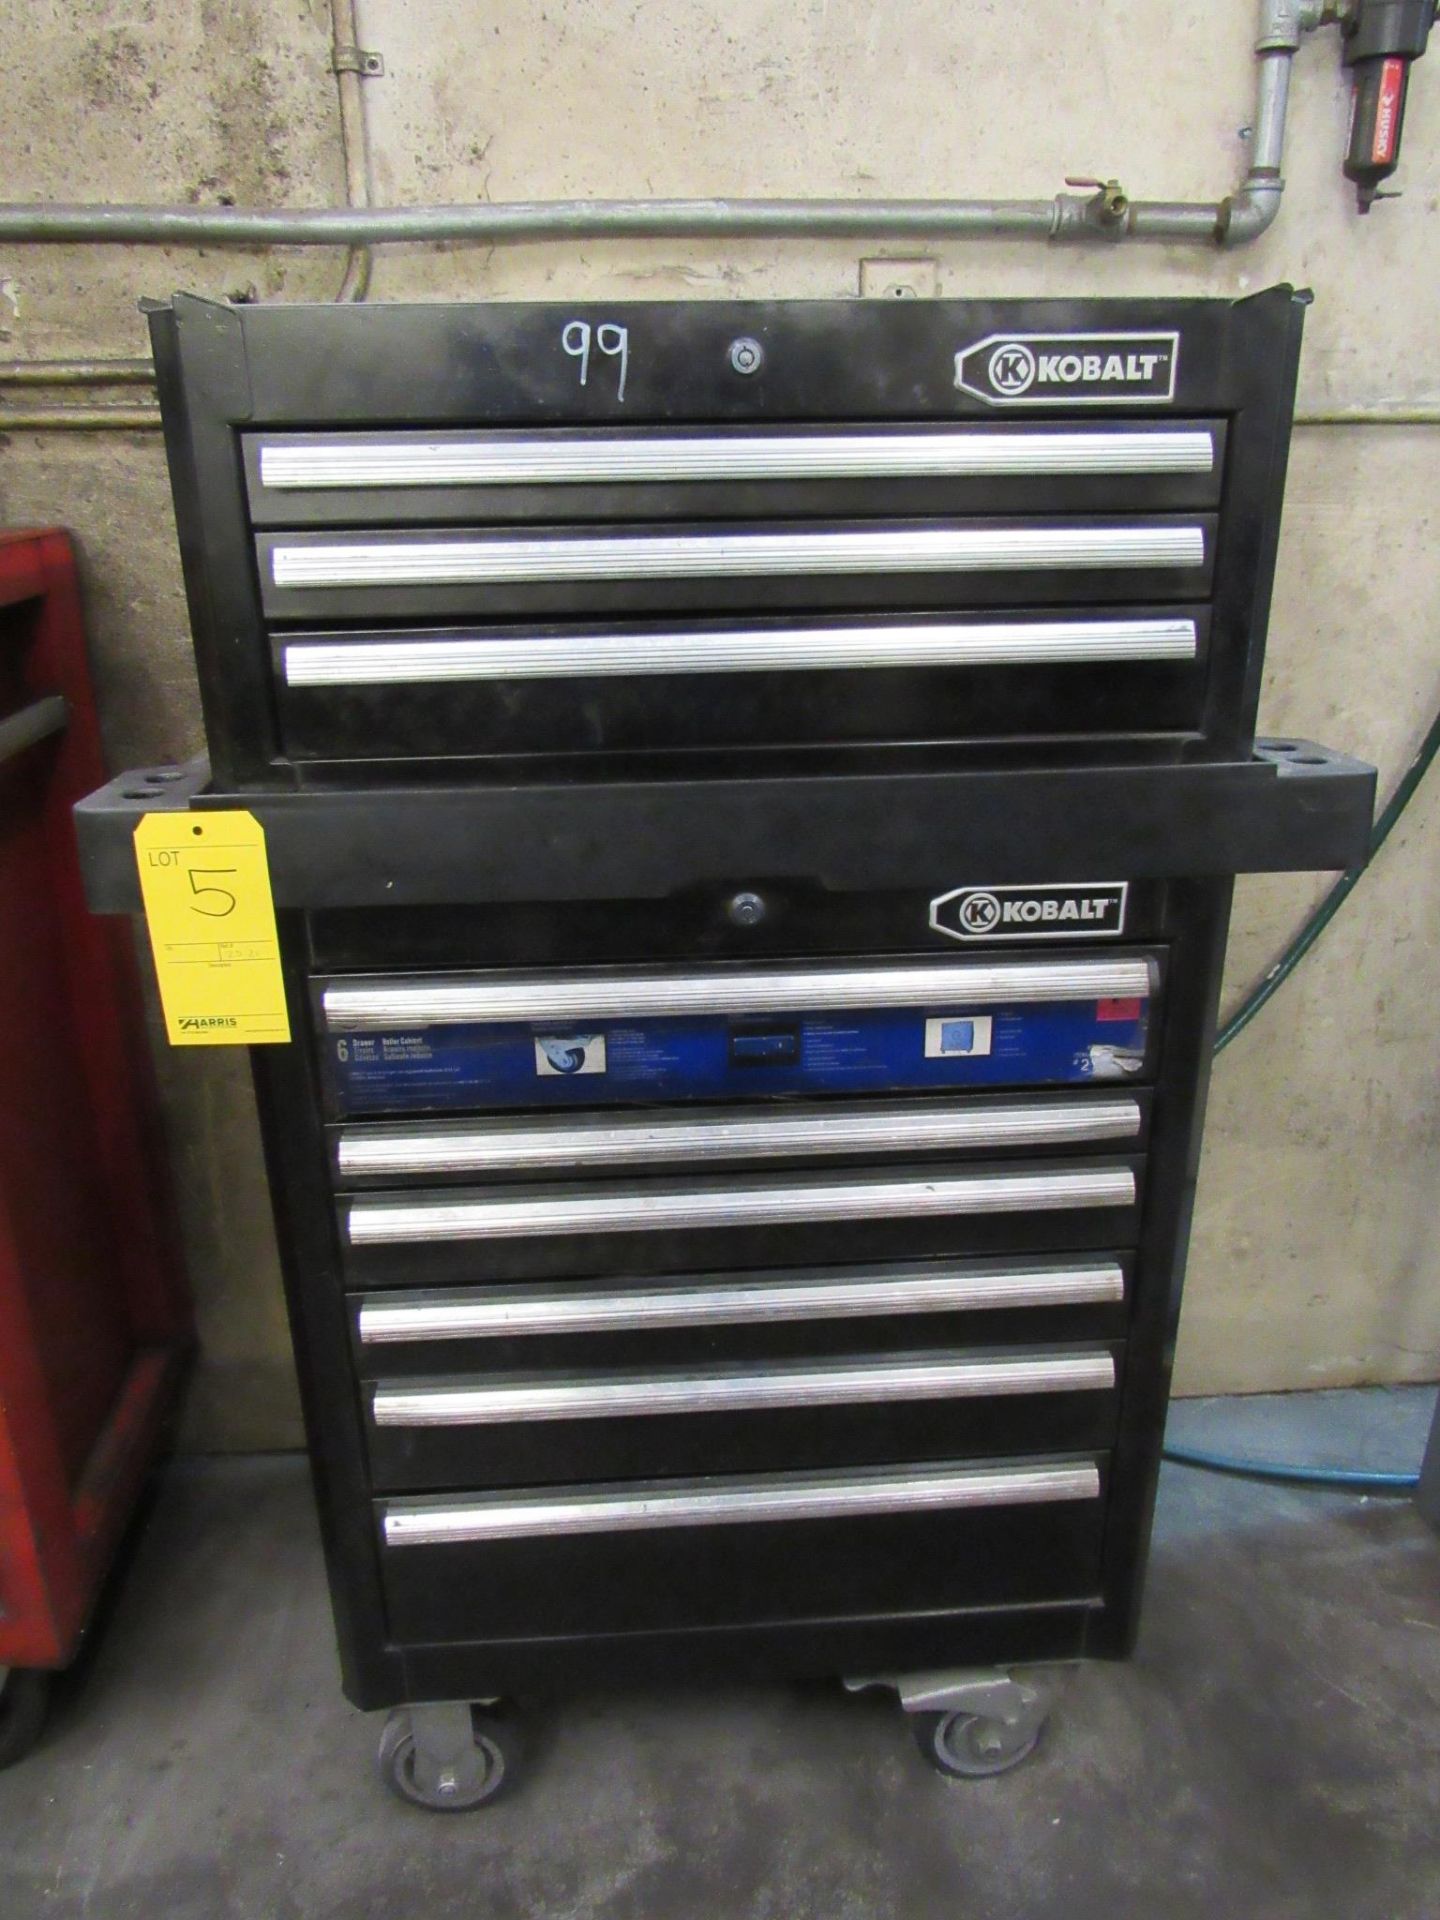 Kobalt 6 drawer tool chest on heavy duty casters with 3 drawer cabinet on top, inc. contents